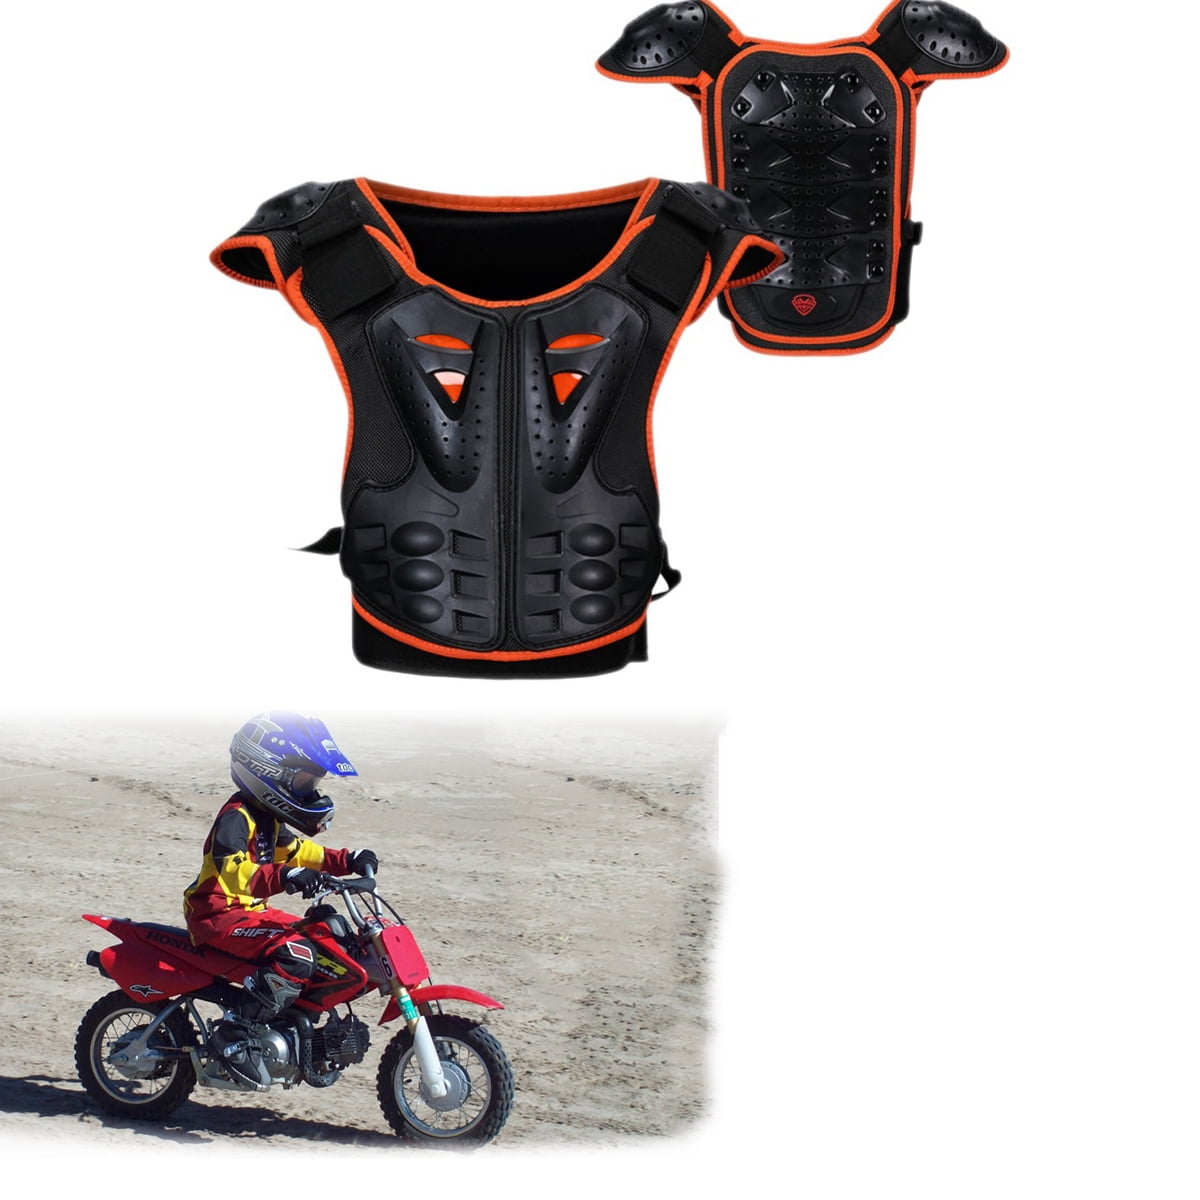 Motocross Motorbike Body Armour Motorcycle Spine Protector Guard Jacket Black 